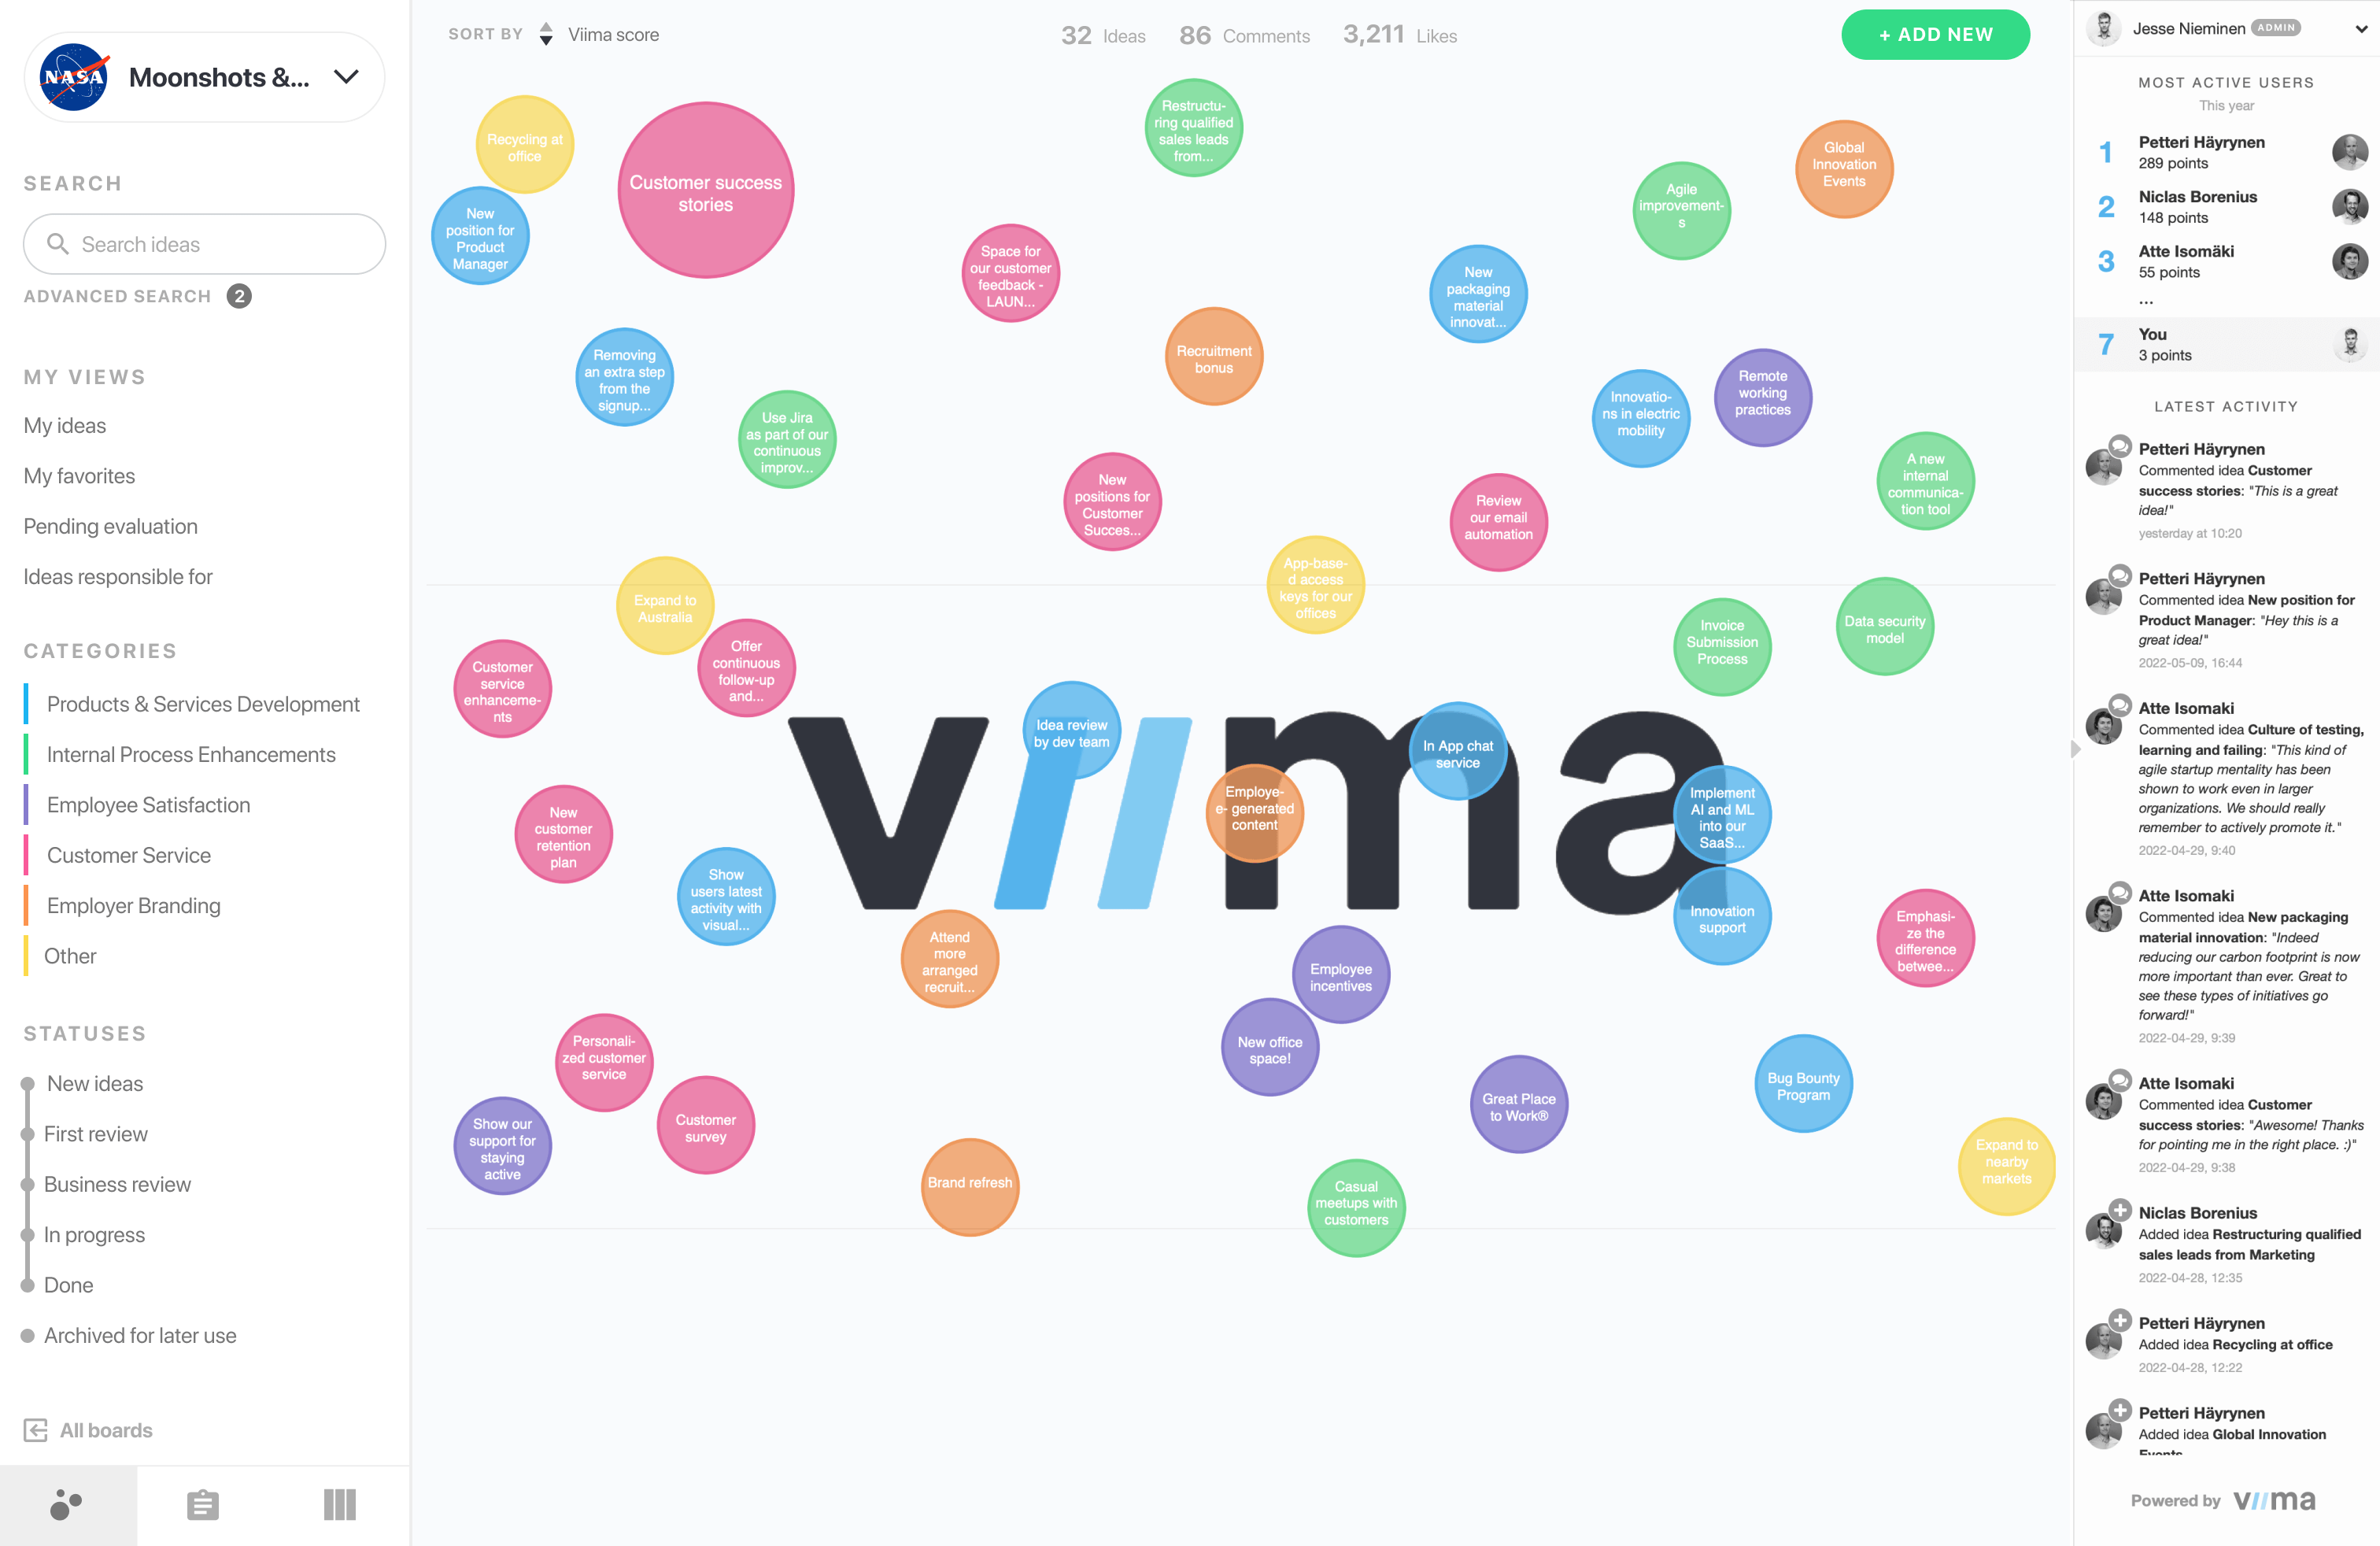 Viima Software - Viima shows ideas in a uniquely visual and engaging way